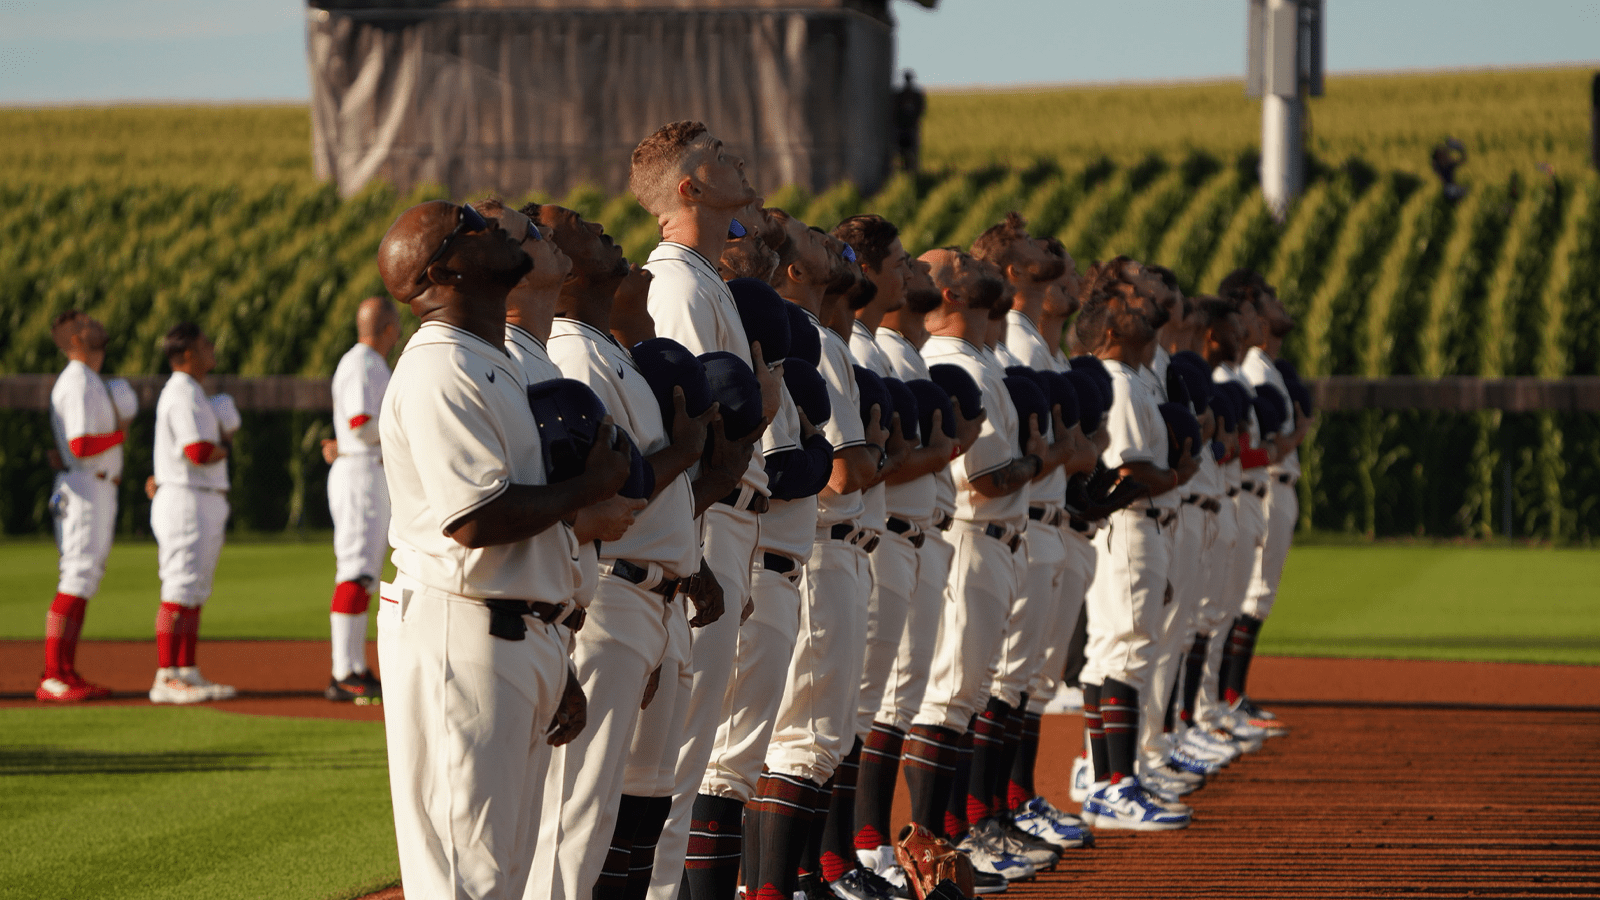 Sights and sounds from the Cubs' Field of Dreams adventure